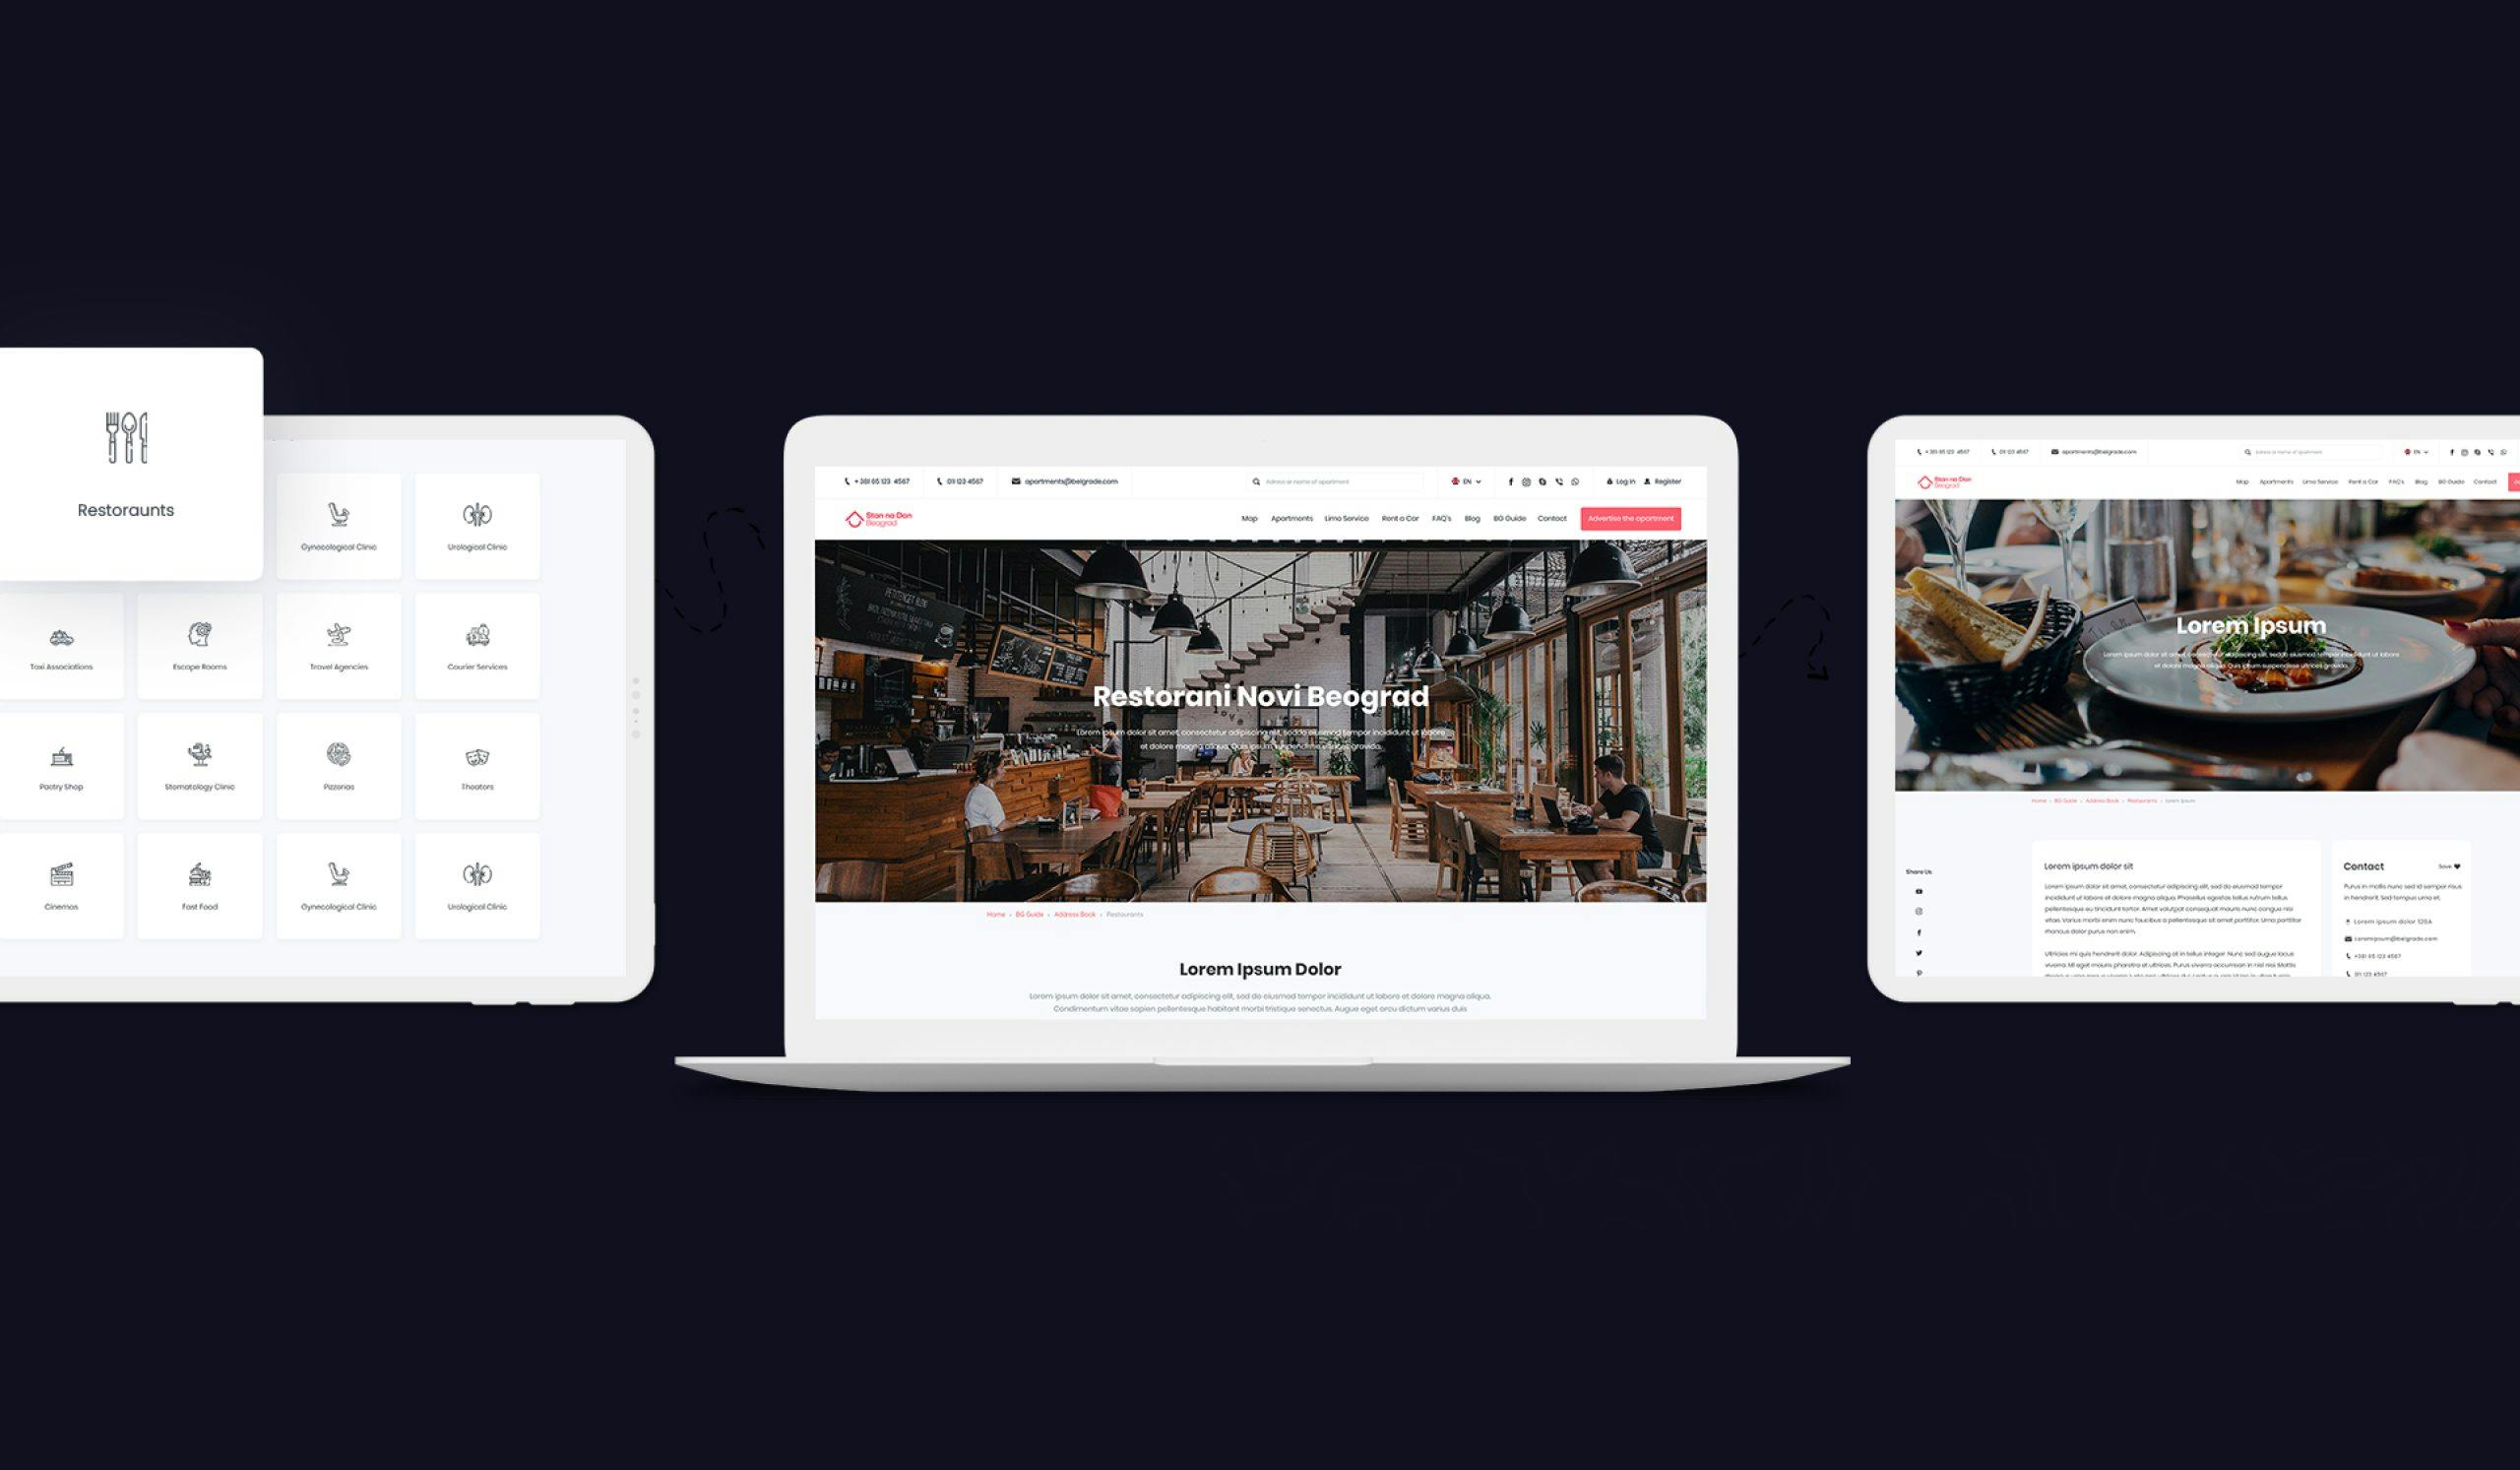 Multivendor apartment system is a fully responsive site.